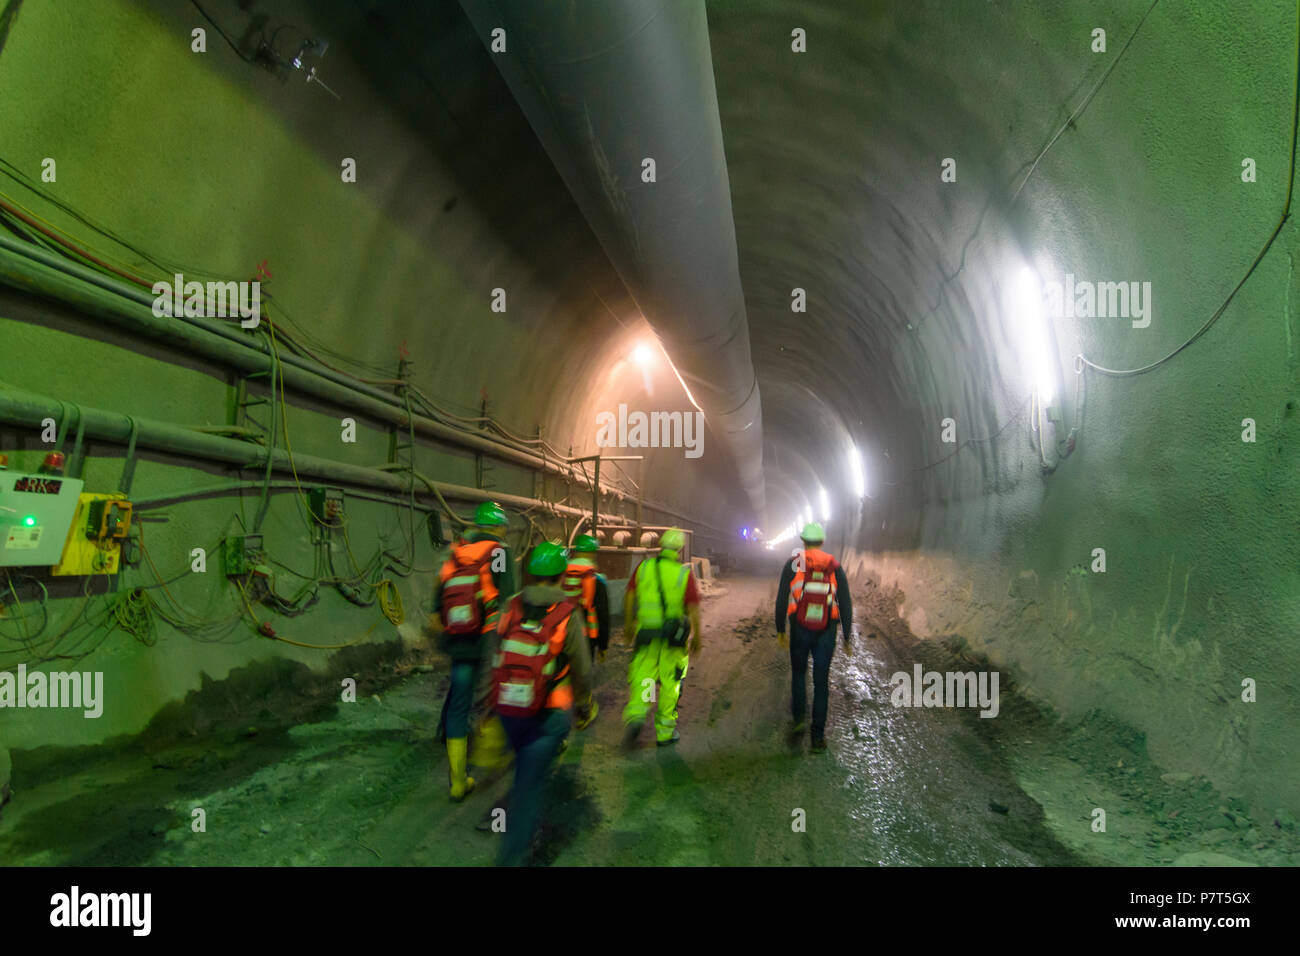 Spital am Semmering: Semmering-Basistunnel (Semmering Base Tunnel) of Semmeringbahn (Semmering railway) under construction by a consortium of company  Stock Photo